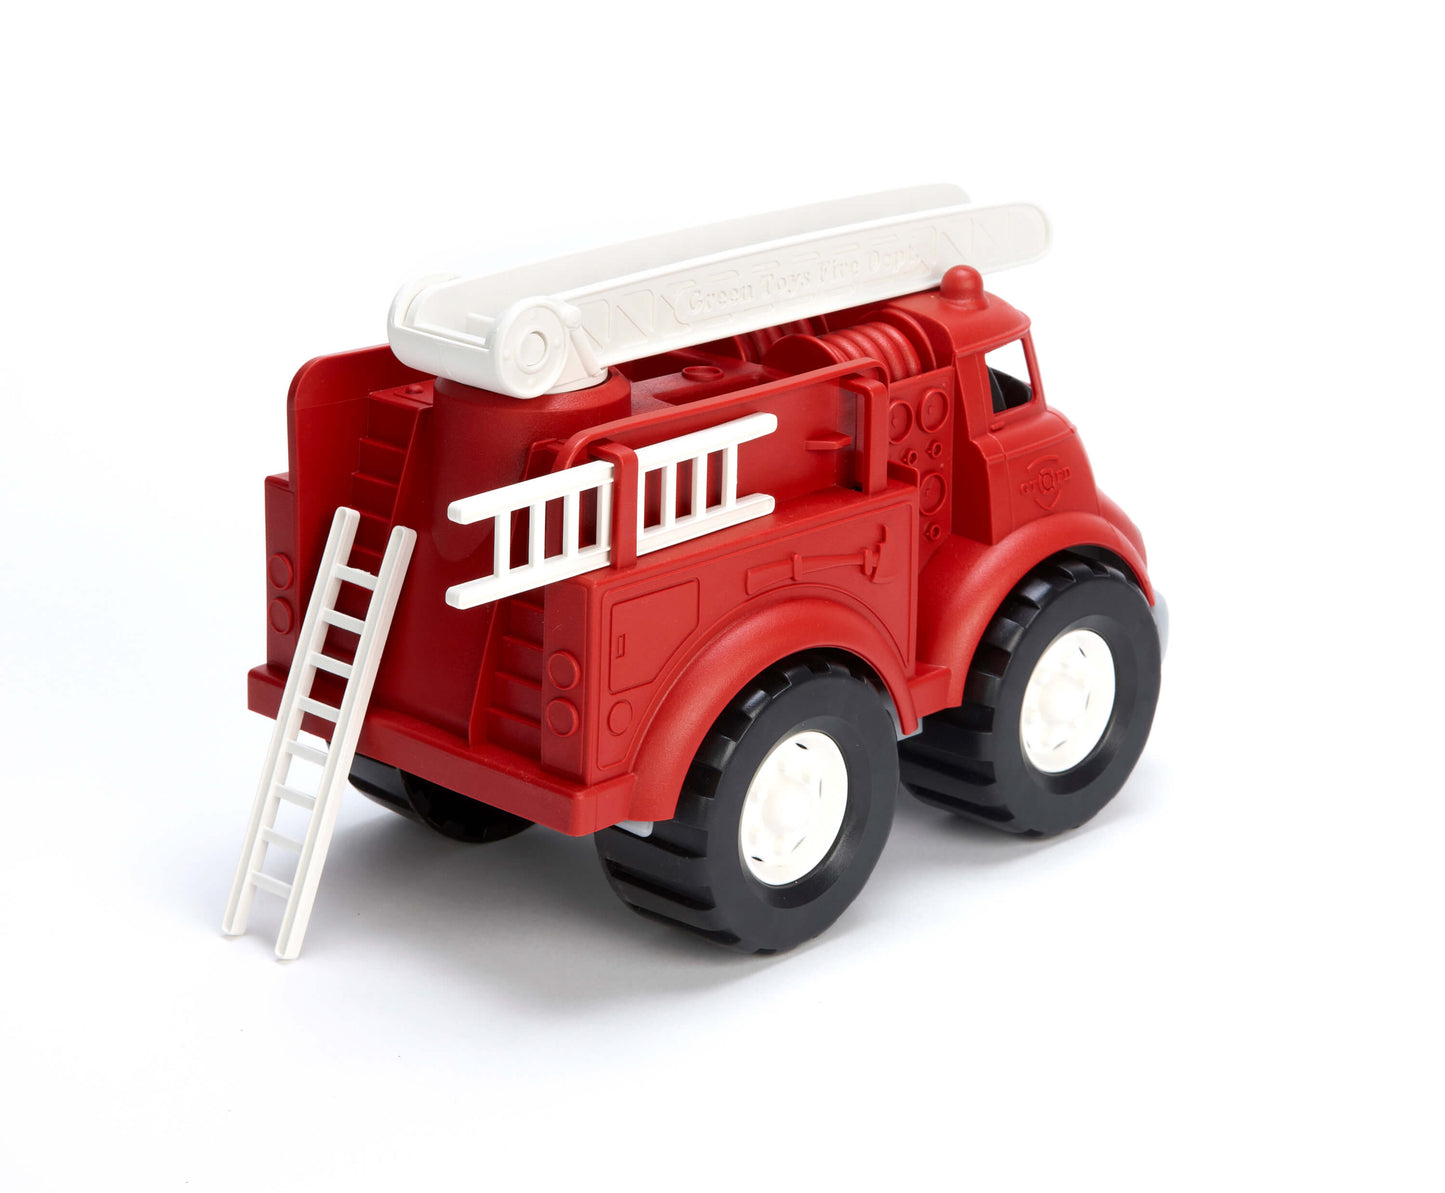 Fire Truck Red Made From 100% Recycled Plastic Milk Jugs Green Toys - Green Distributors